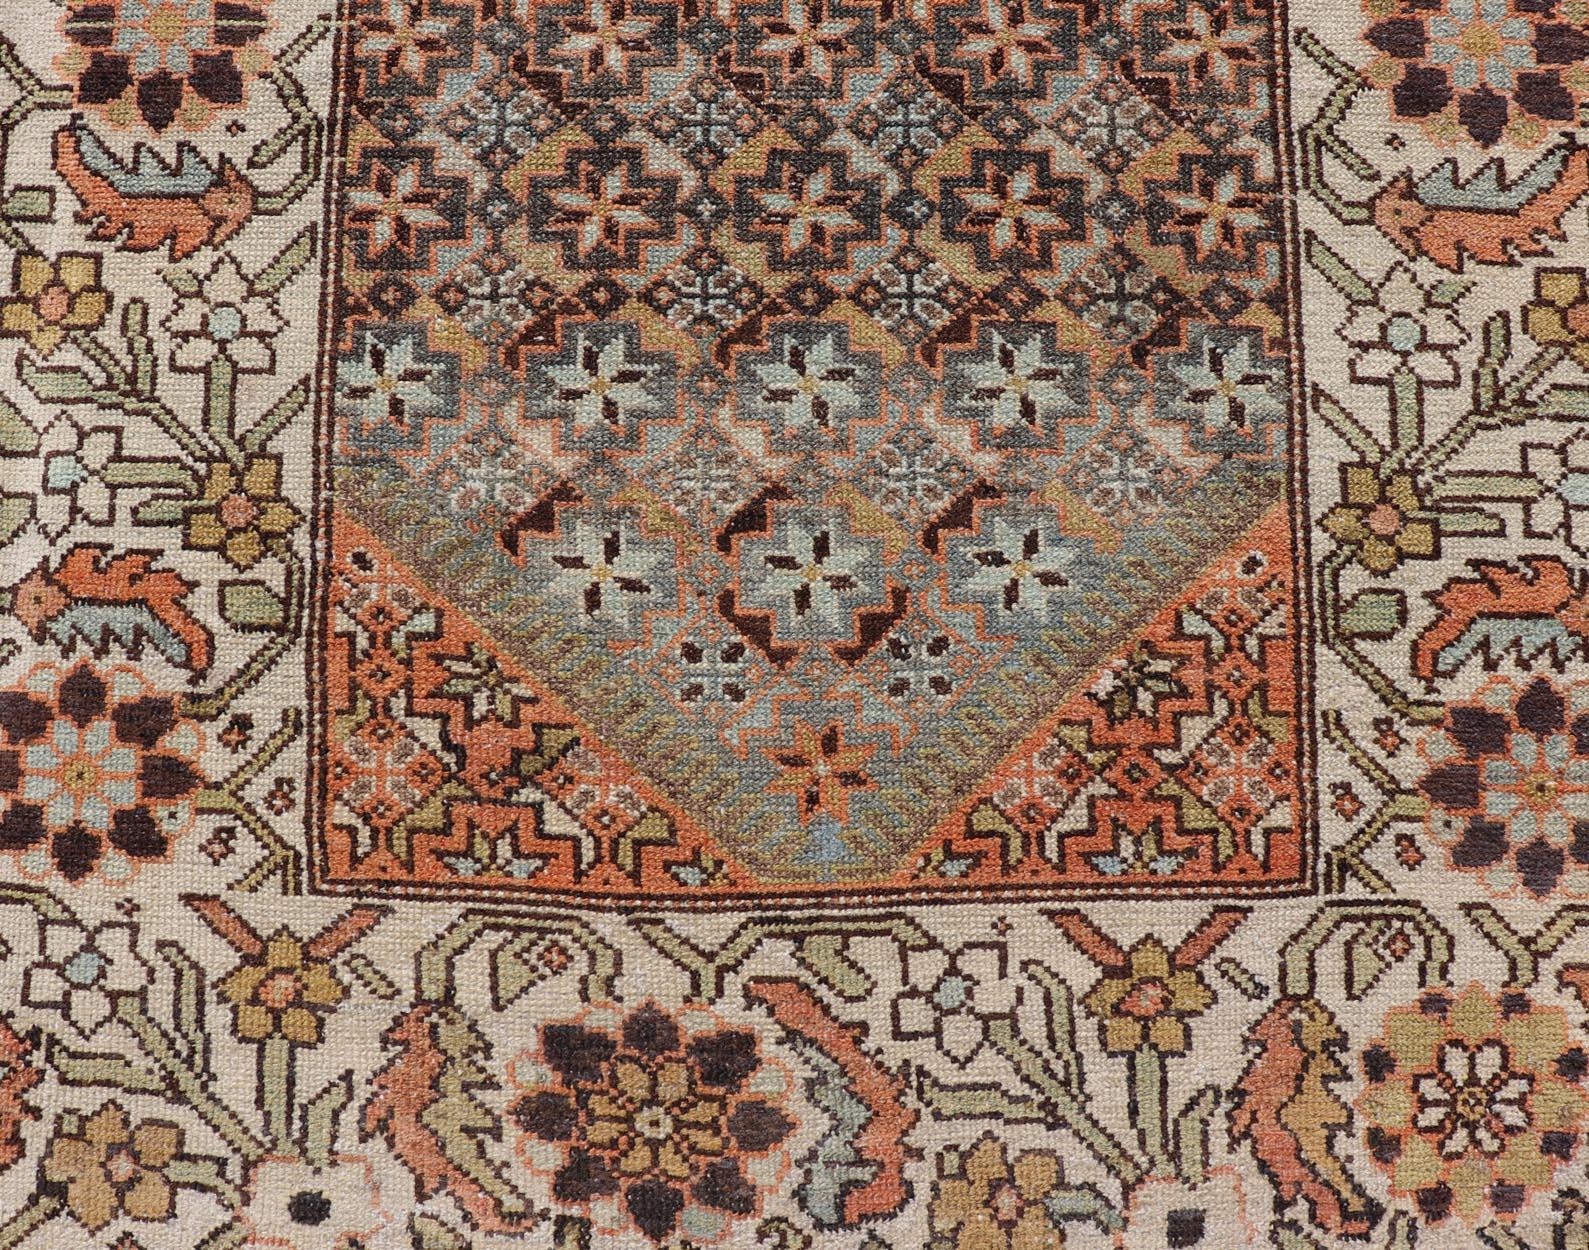 Antique hand knotted Bakhtiari Runner from Persia with multicolored all-over floral and geometric design, Keivan Woven Arts / rug EMB-9545-P13074, country of origin / type: Iran / Bakhtiari, circa 1910

Measures: 3'4 x 12'10.